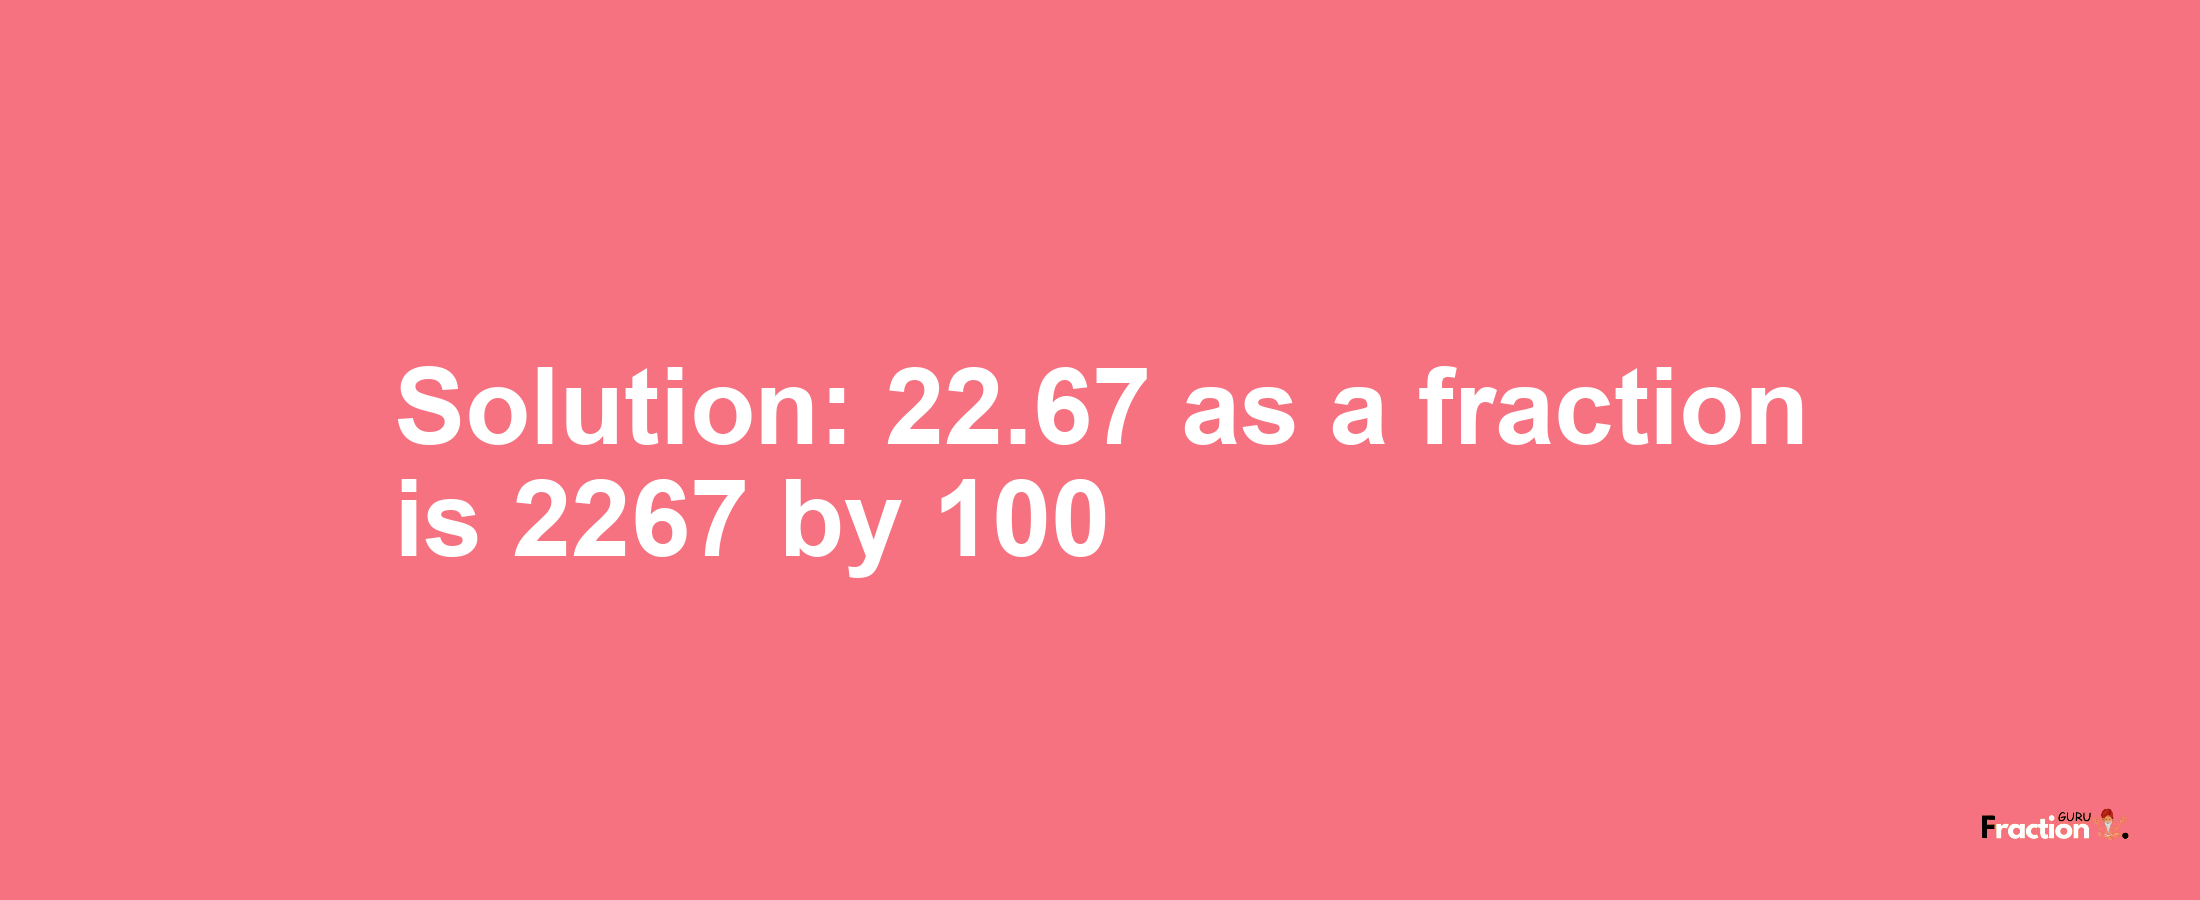 Solution:22.67 as a fraction is 2267/100